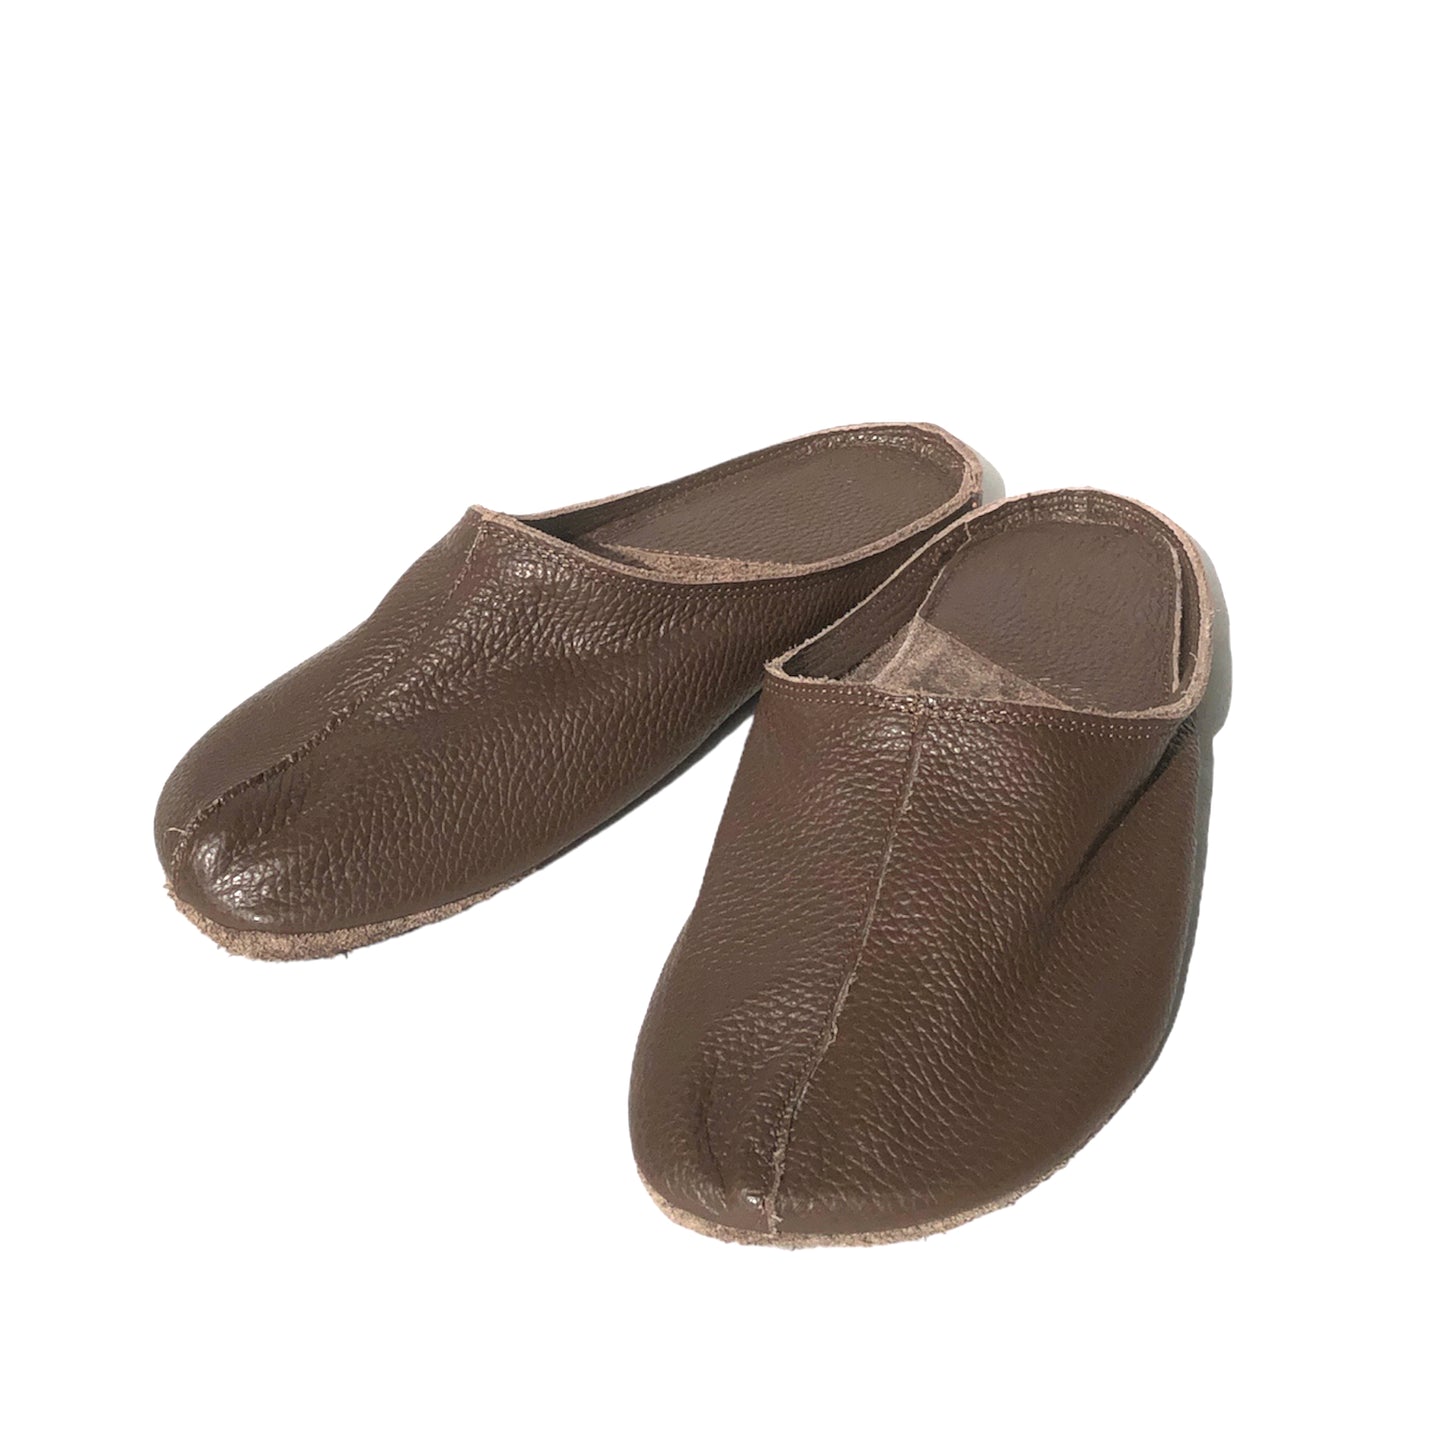 Leather slippers made from leftovers